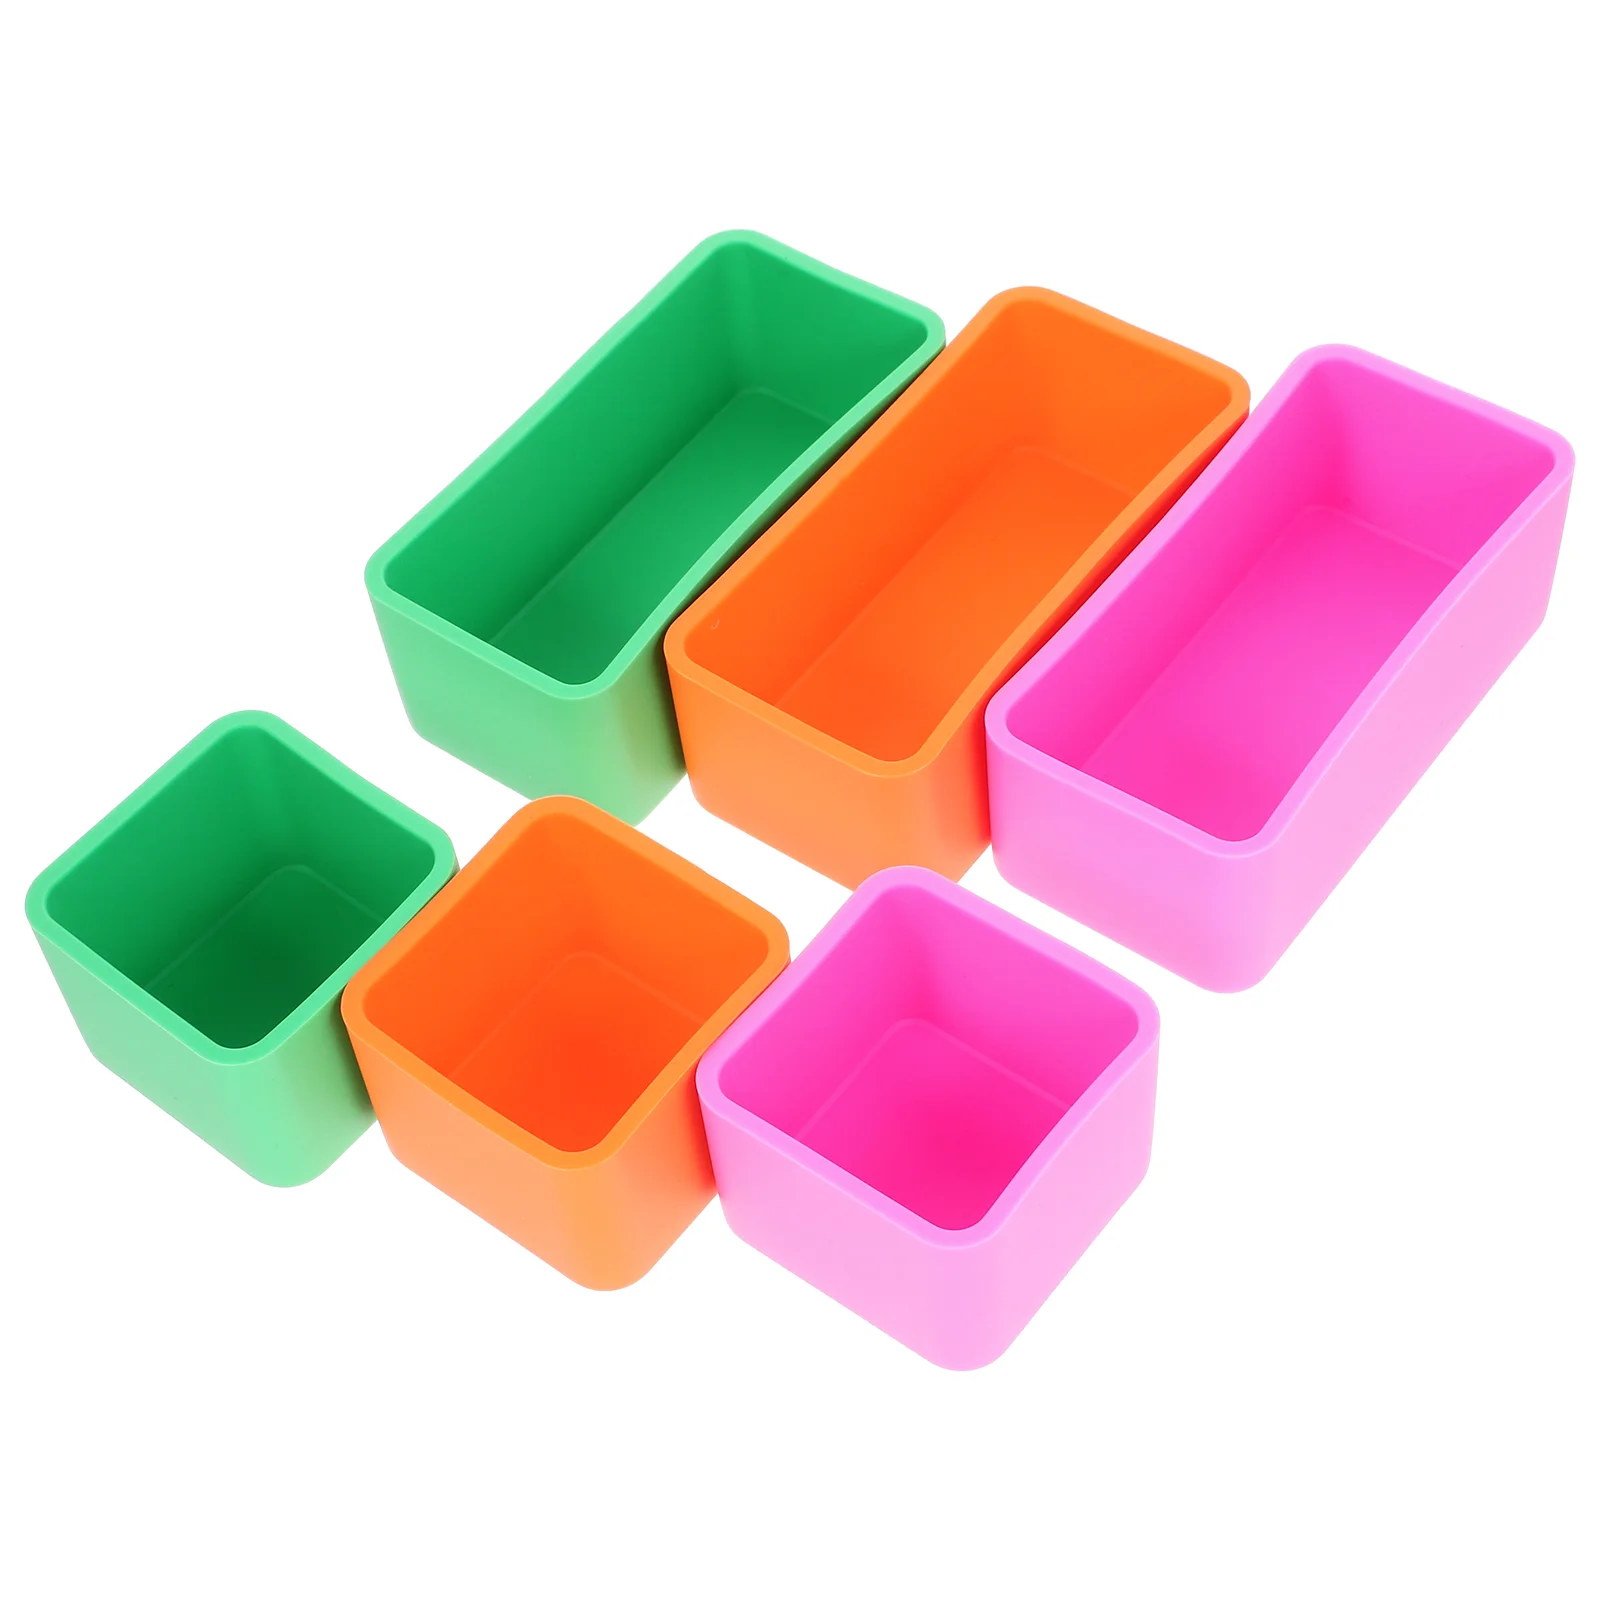 

6 Pcs Silicone Lunch Box An Fittings Food Supply Accessory Convenient Container Camping Silica Gel Portable